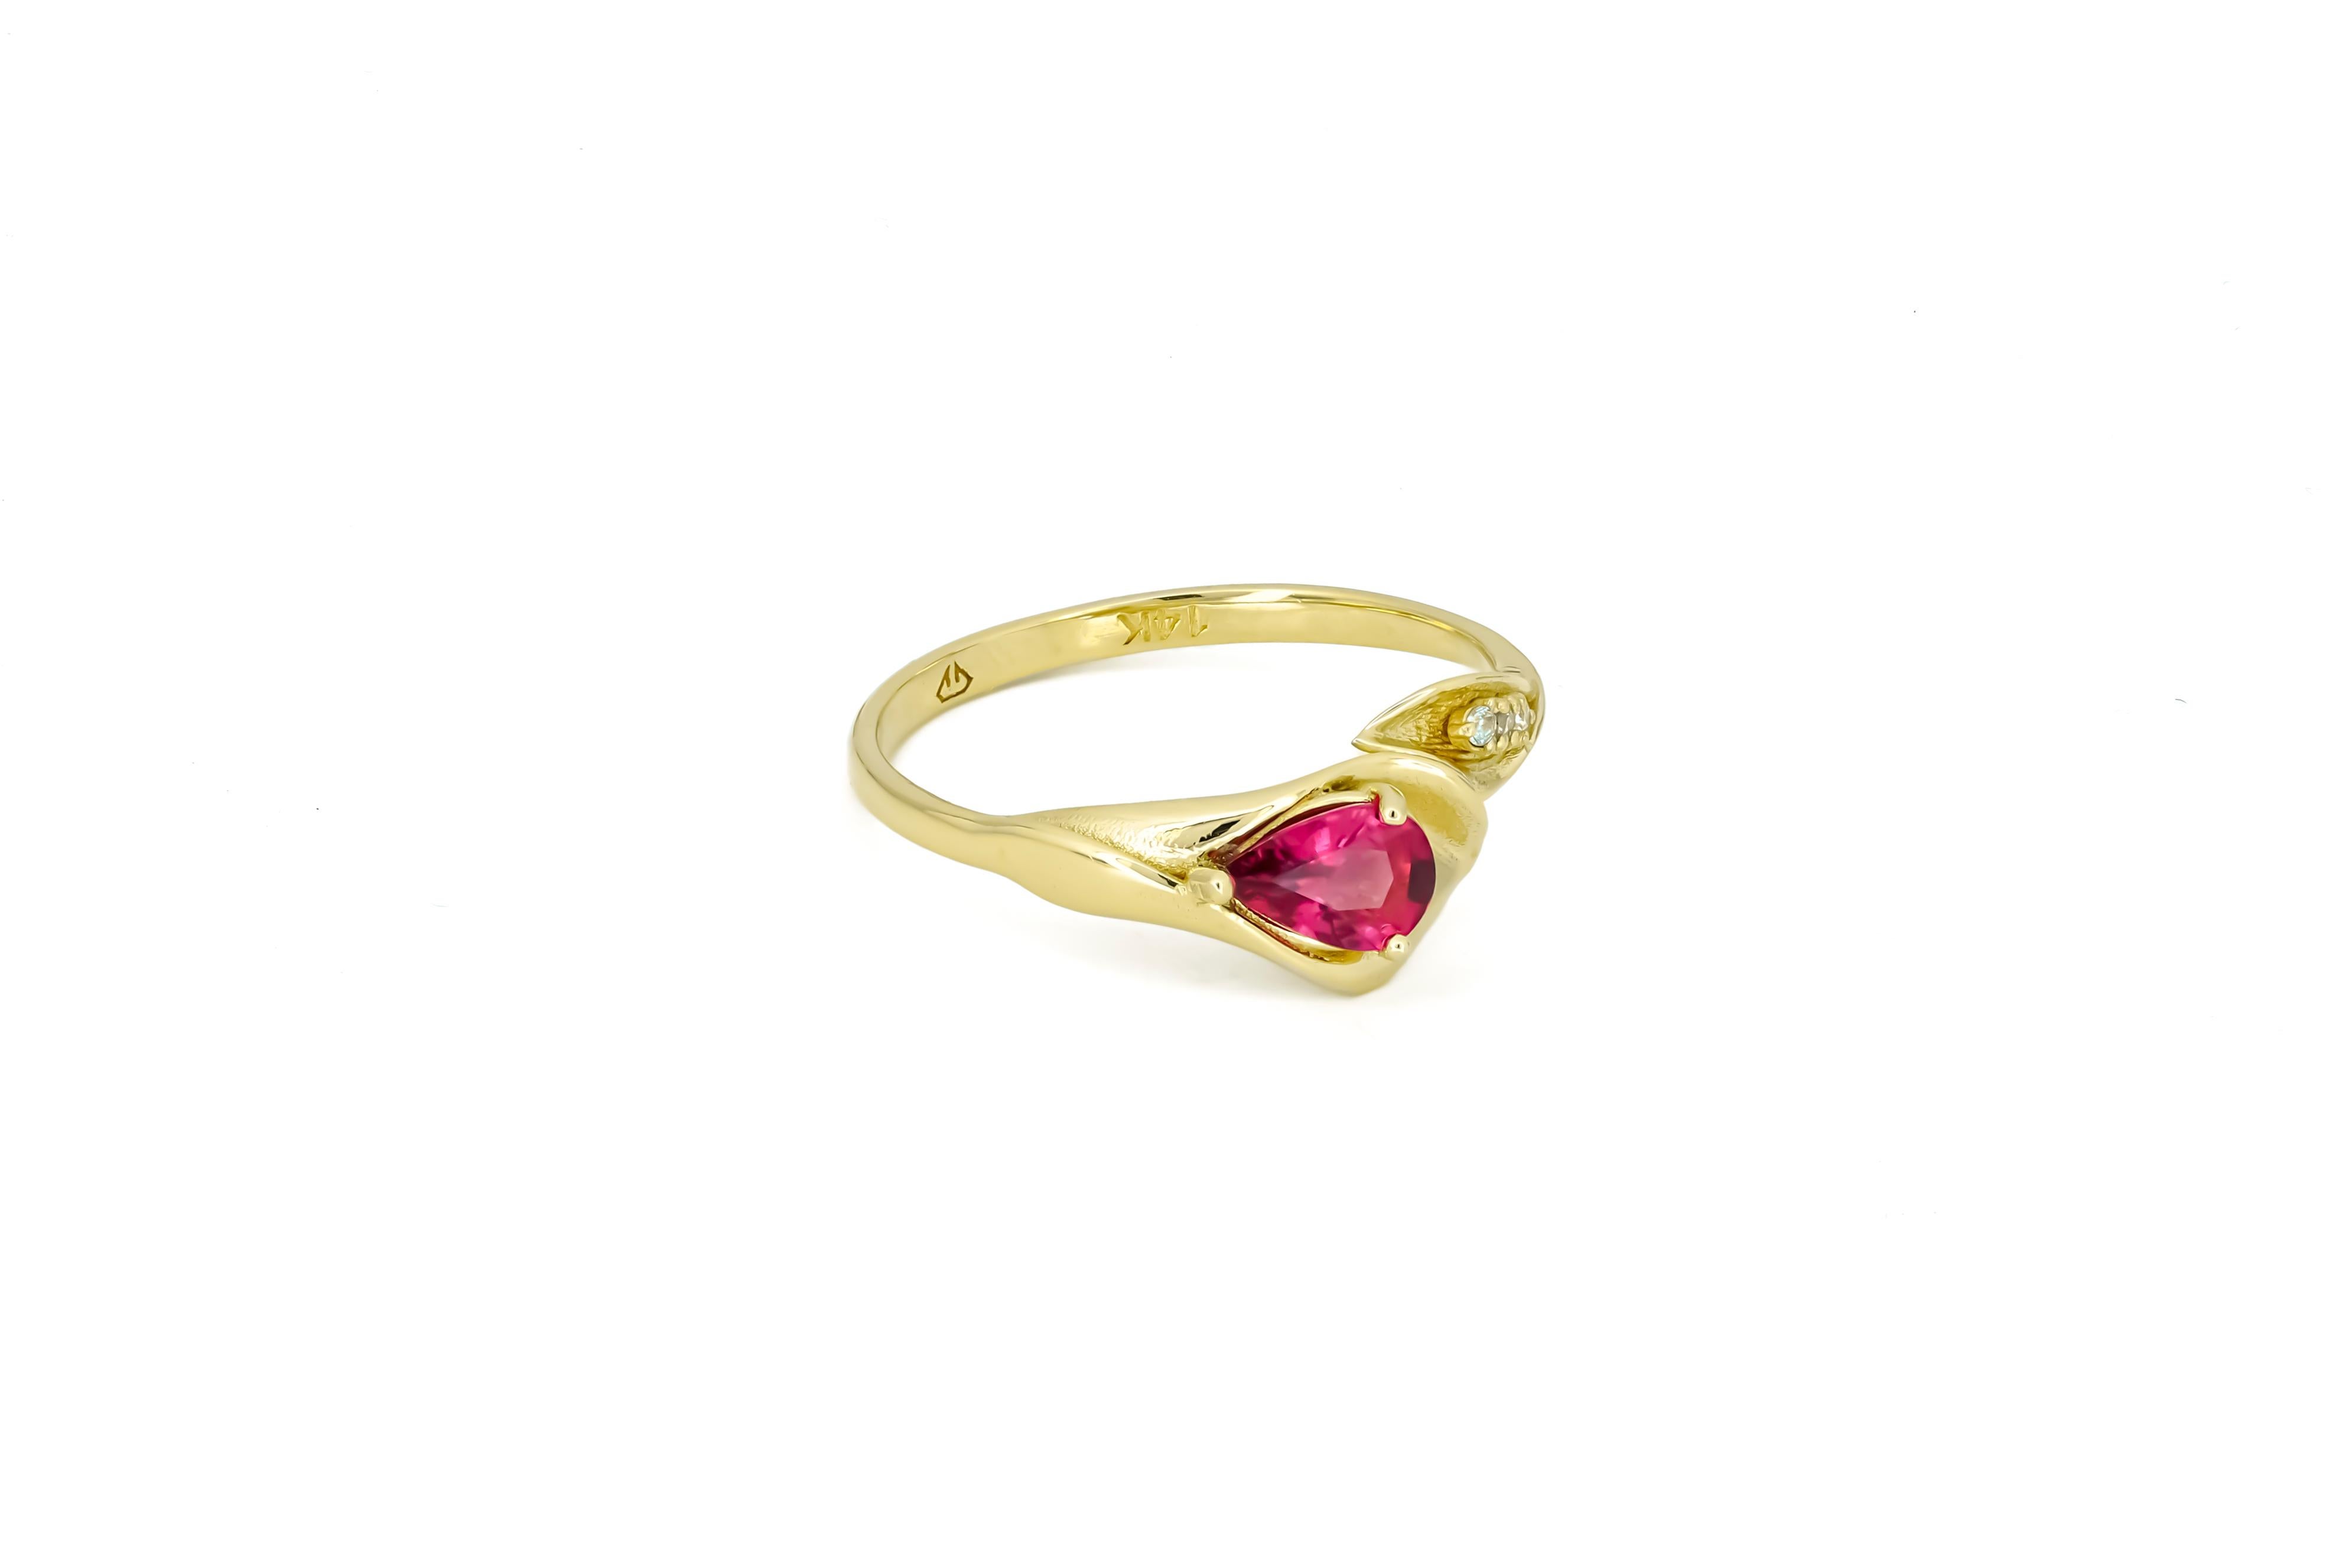 Lily Calla Gold Ring, 14 Karat Gold Ring with Garnet and Diamonds 7